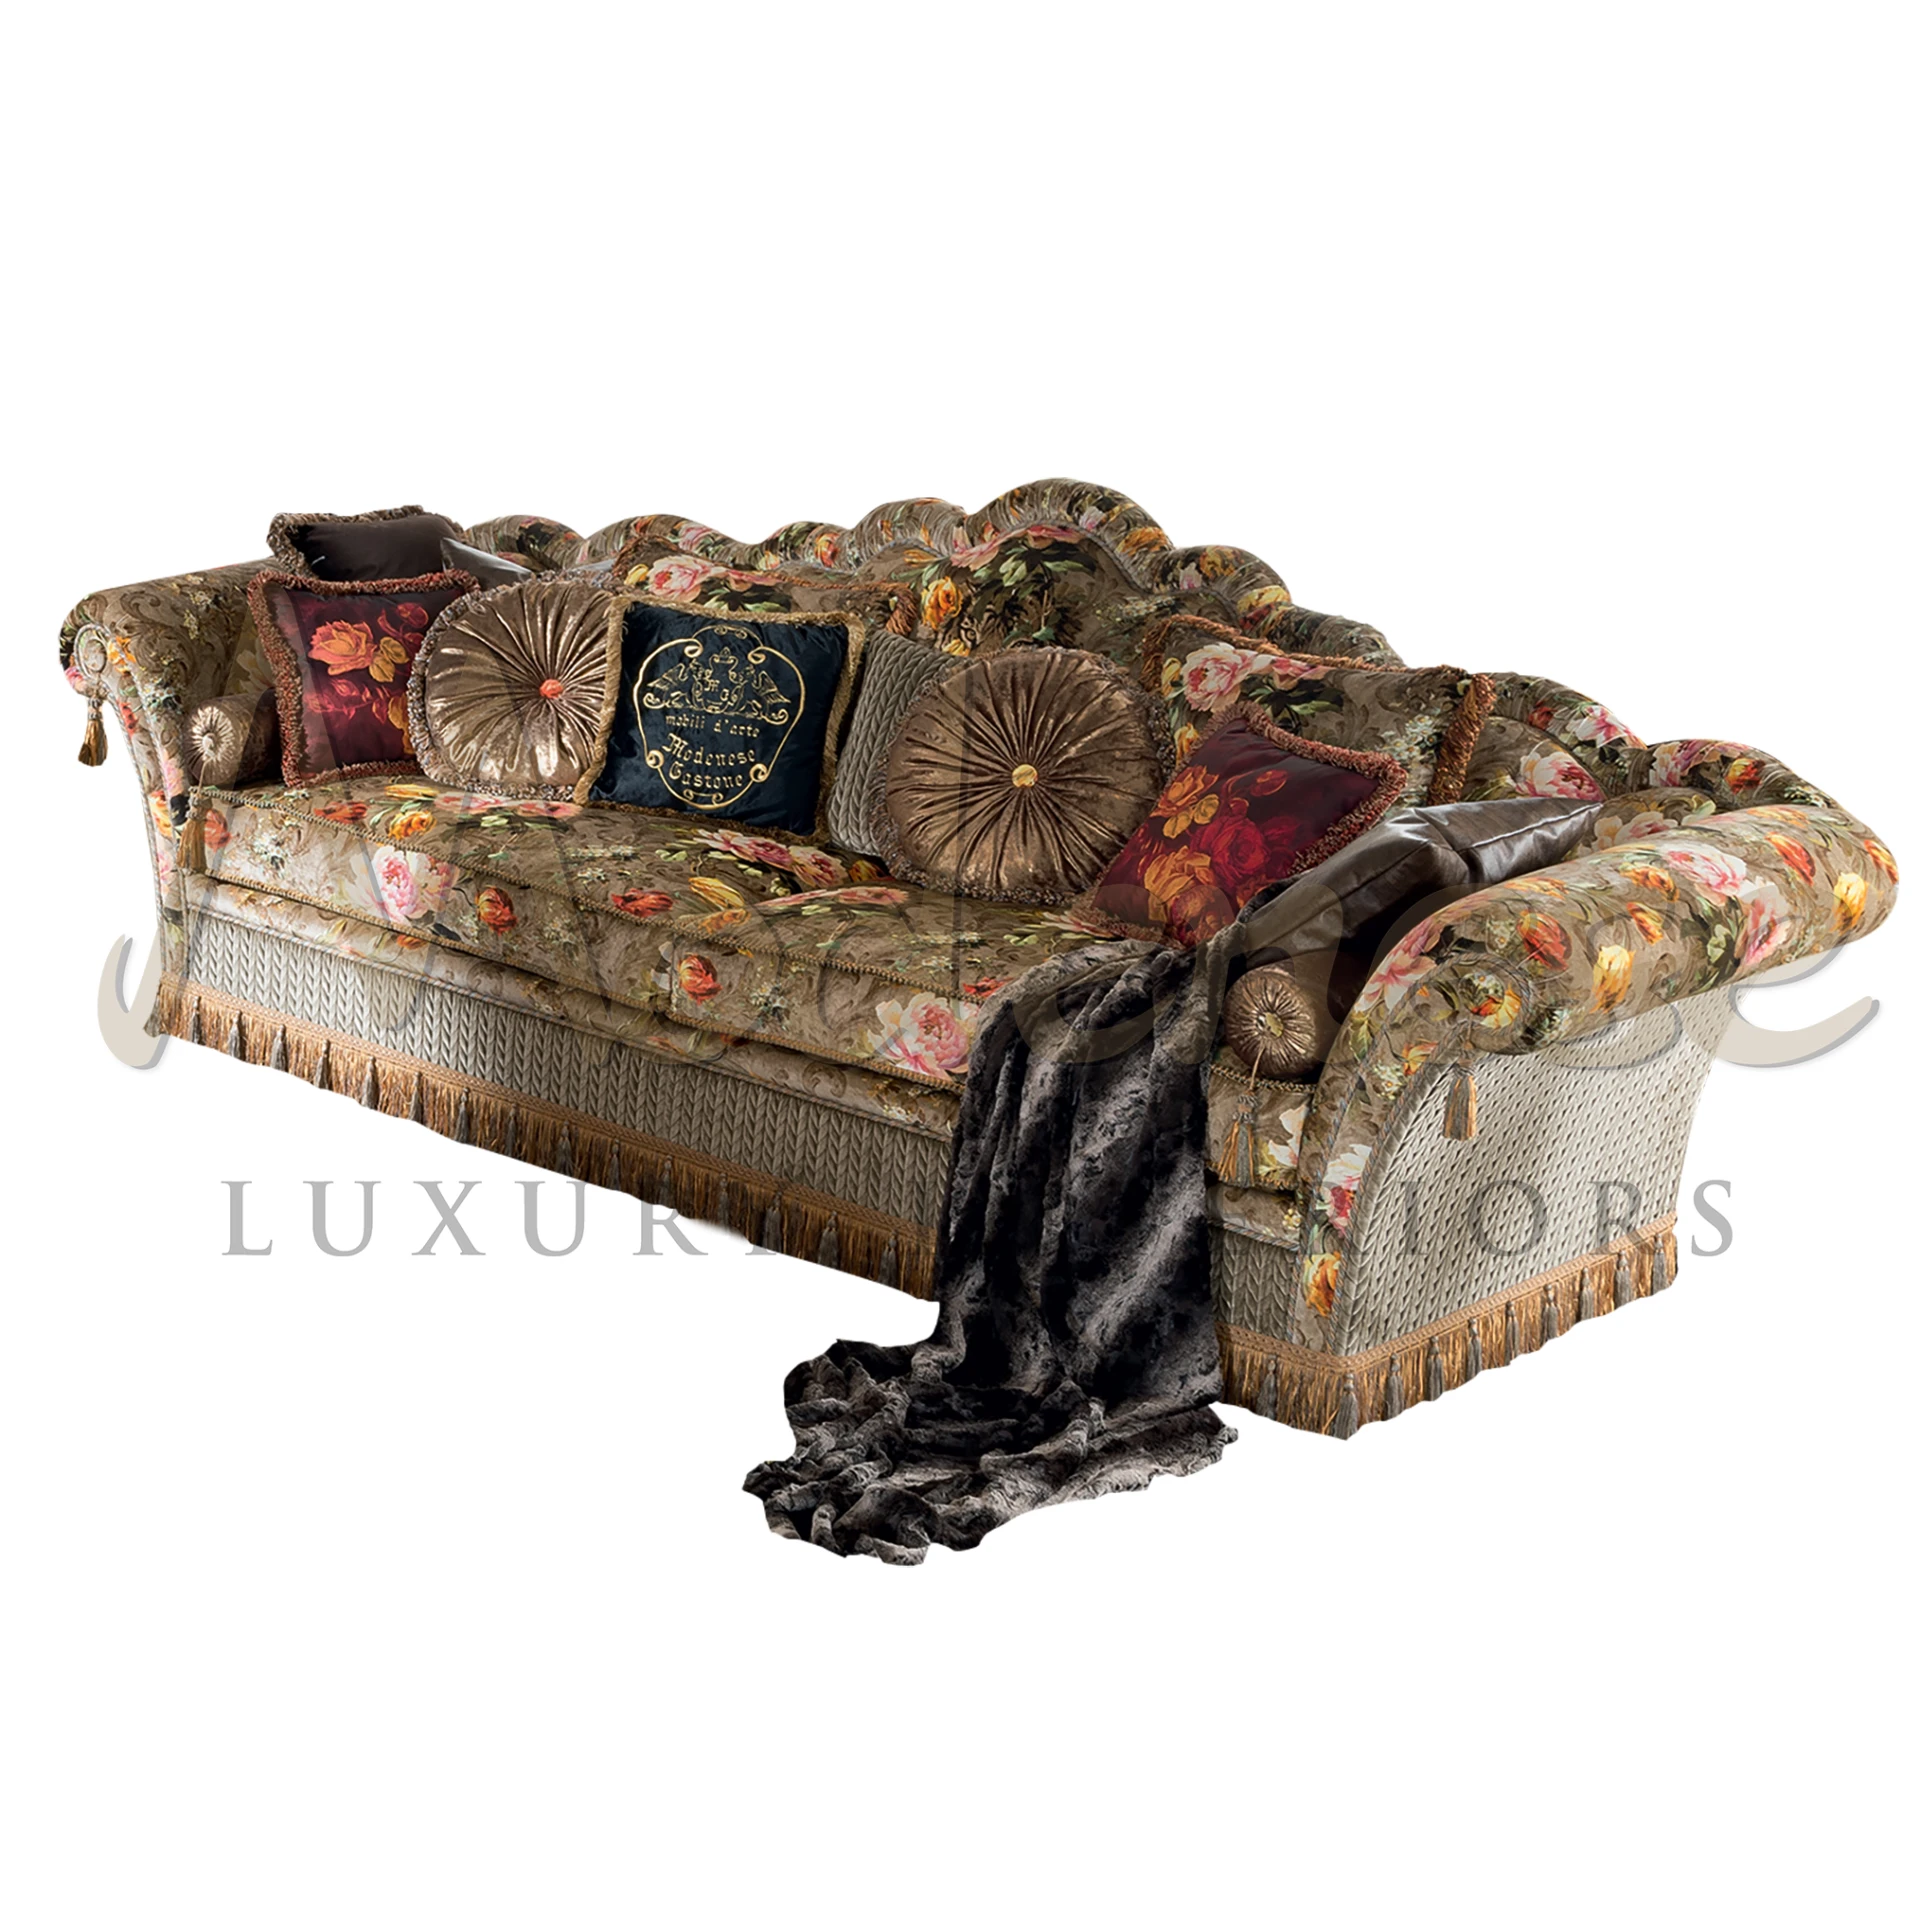 Luxurious 3-seater Floral Upholstery Sofa by Modenese Interiors, offering elegance and comfort for sophisticated living spaces.